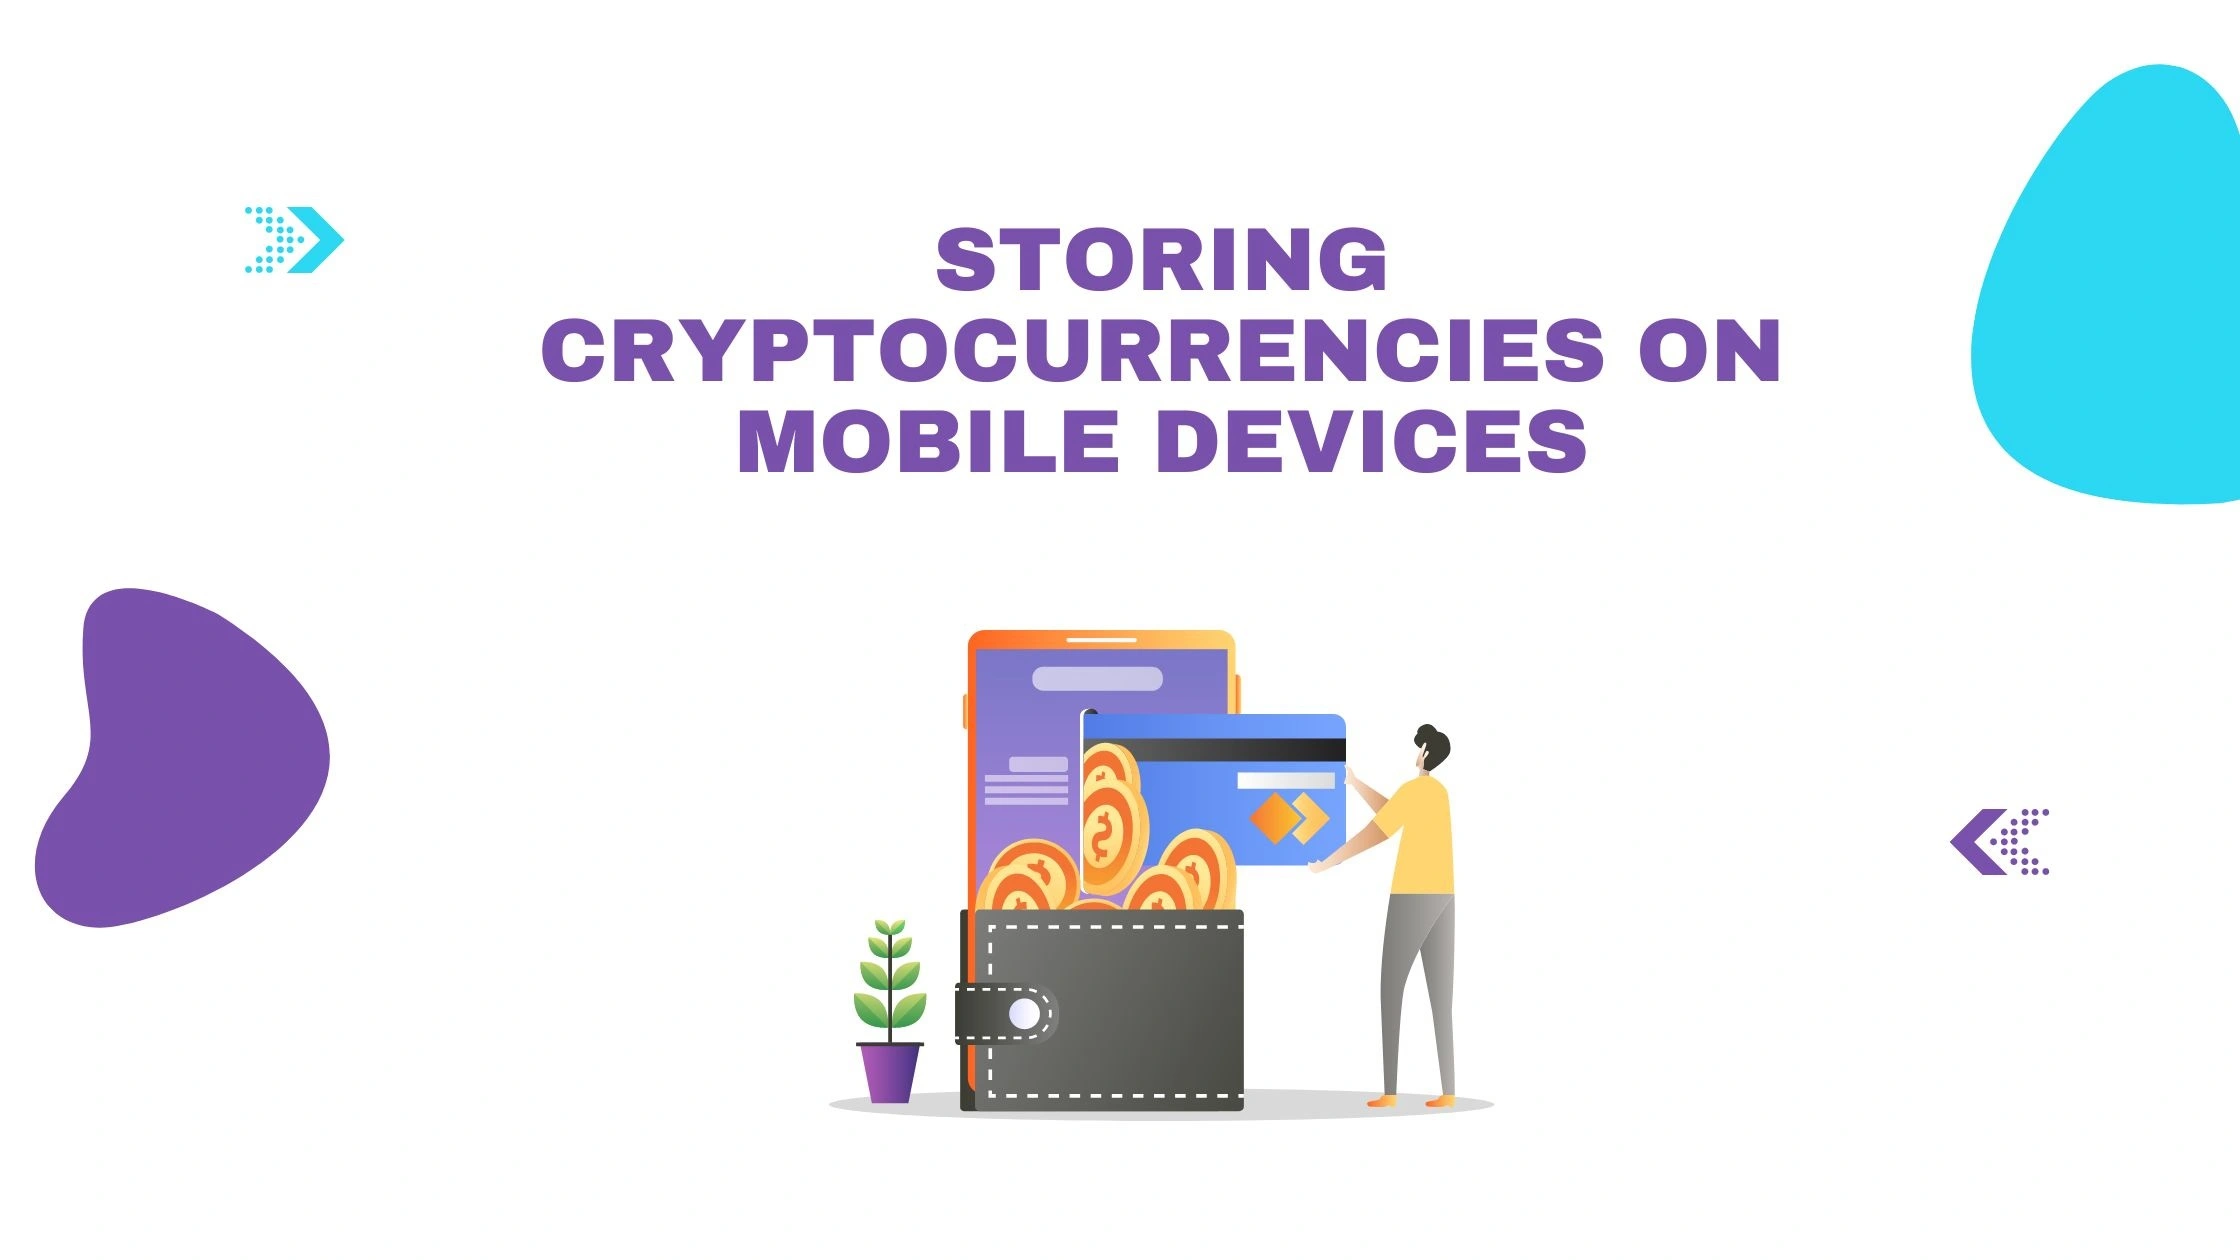 3 Best Practices Of Storing Cryptocurrencies On Mobile Devices